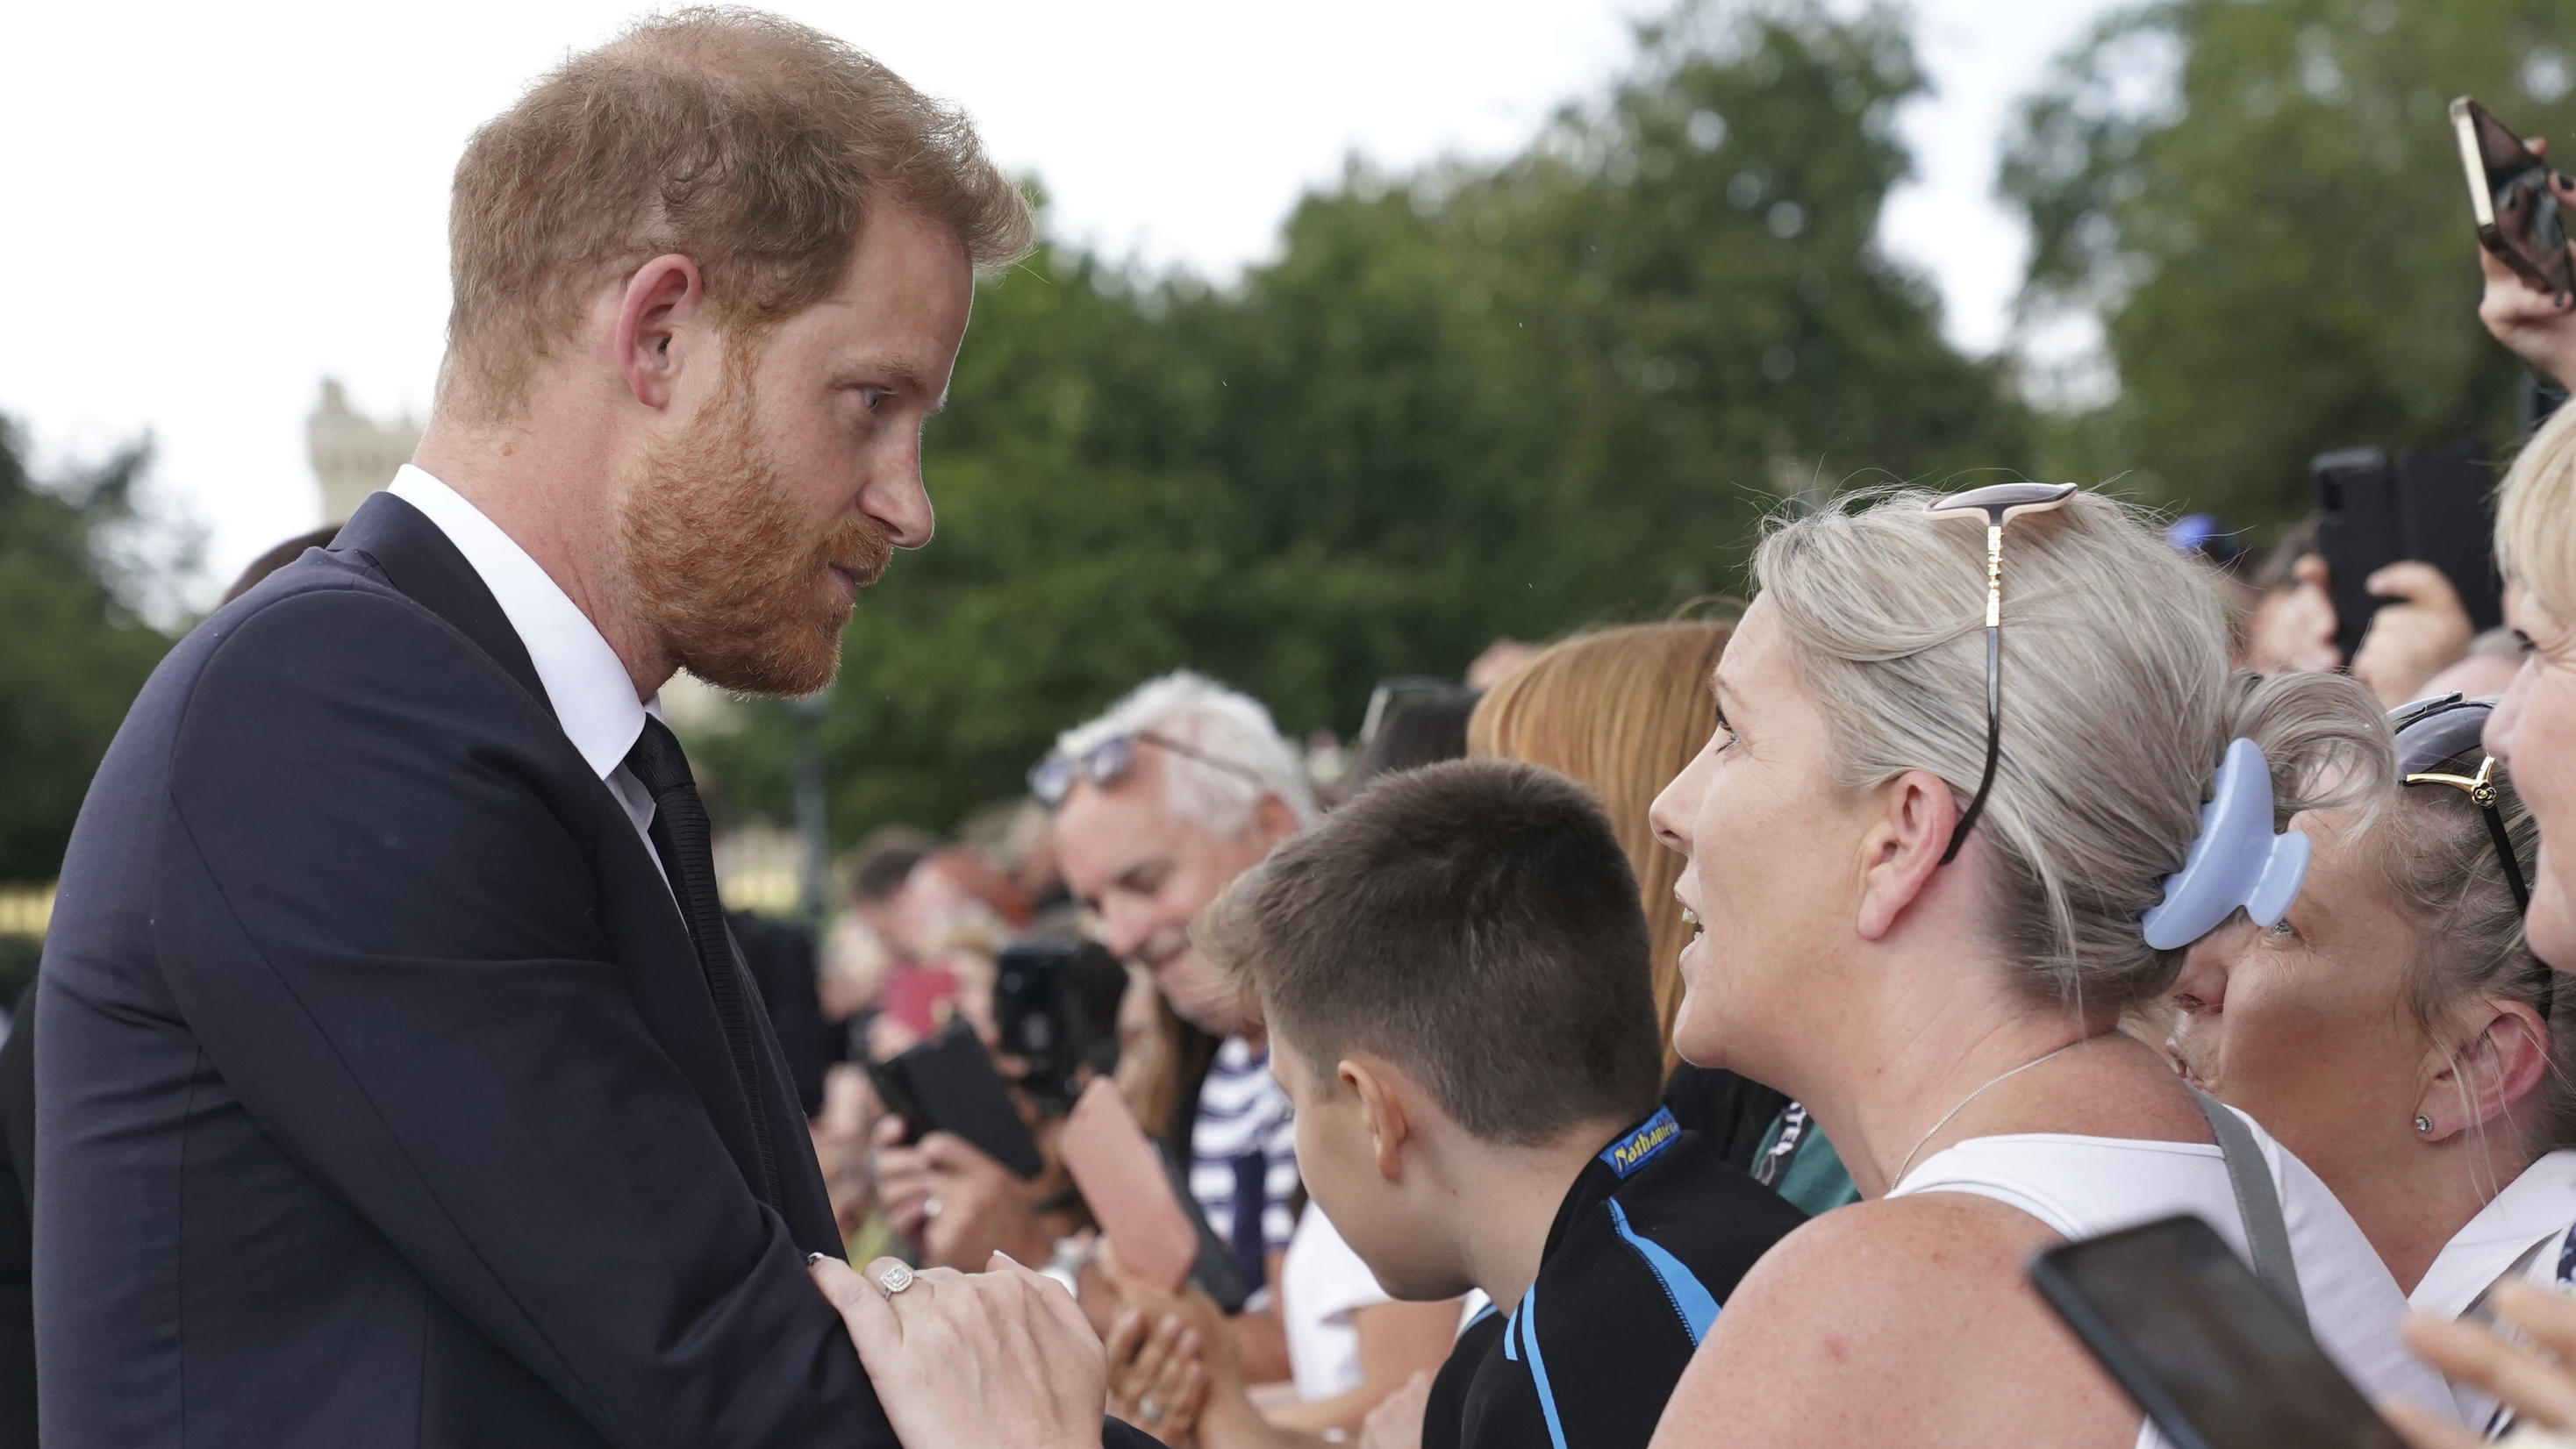 Britain's Prince Harry meets members of the public on a walkabout at Windsor Castle, following the death of Queen Elizabeth II on Thursday, in Windsor, England, Saturday, Sept. 10, 2022. (Kirsty O'Connor/Pool Photo via AP)